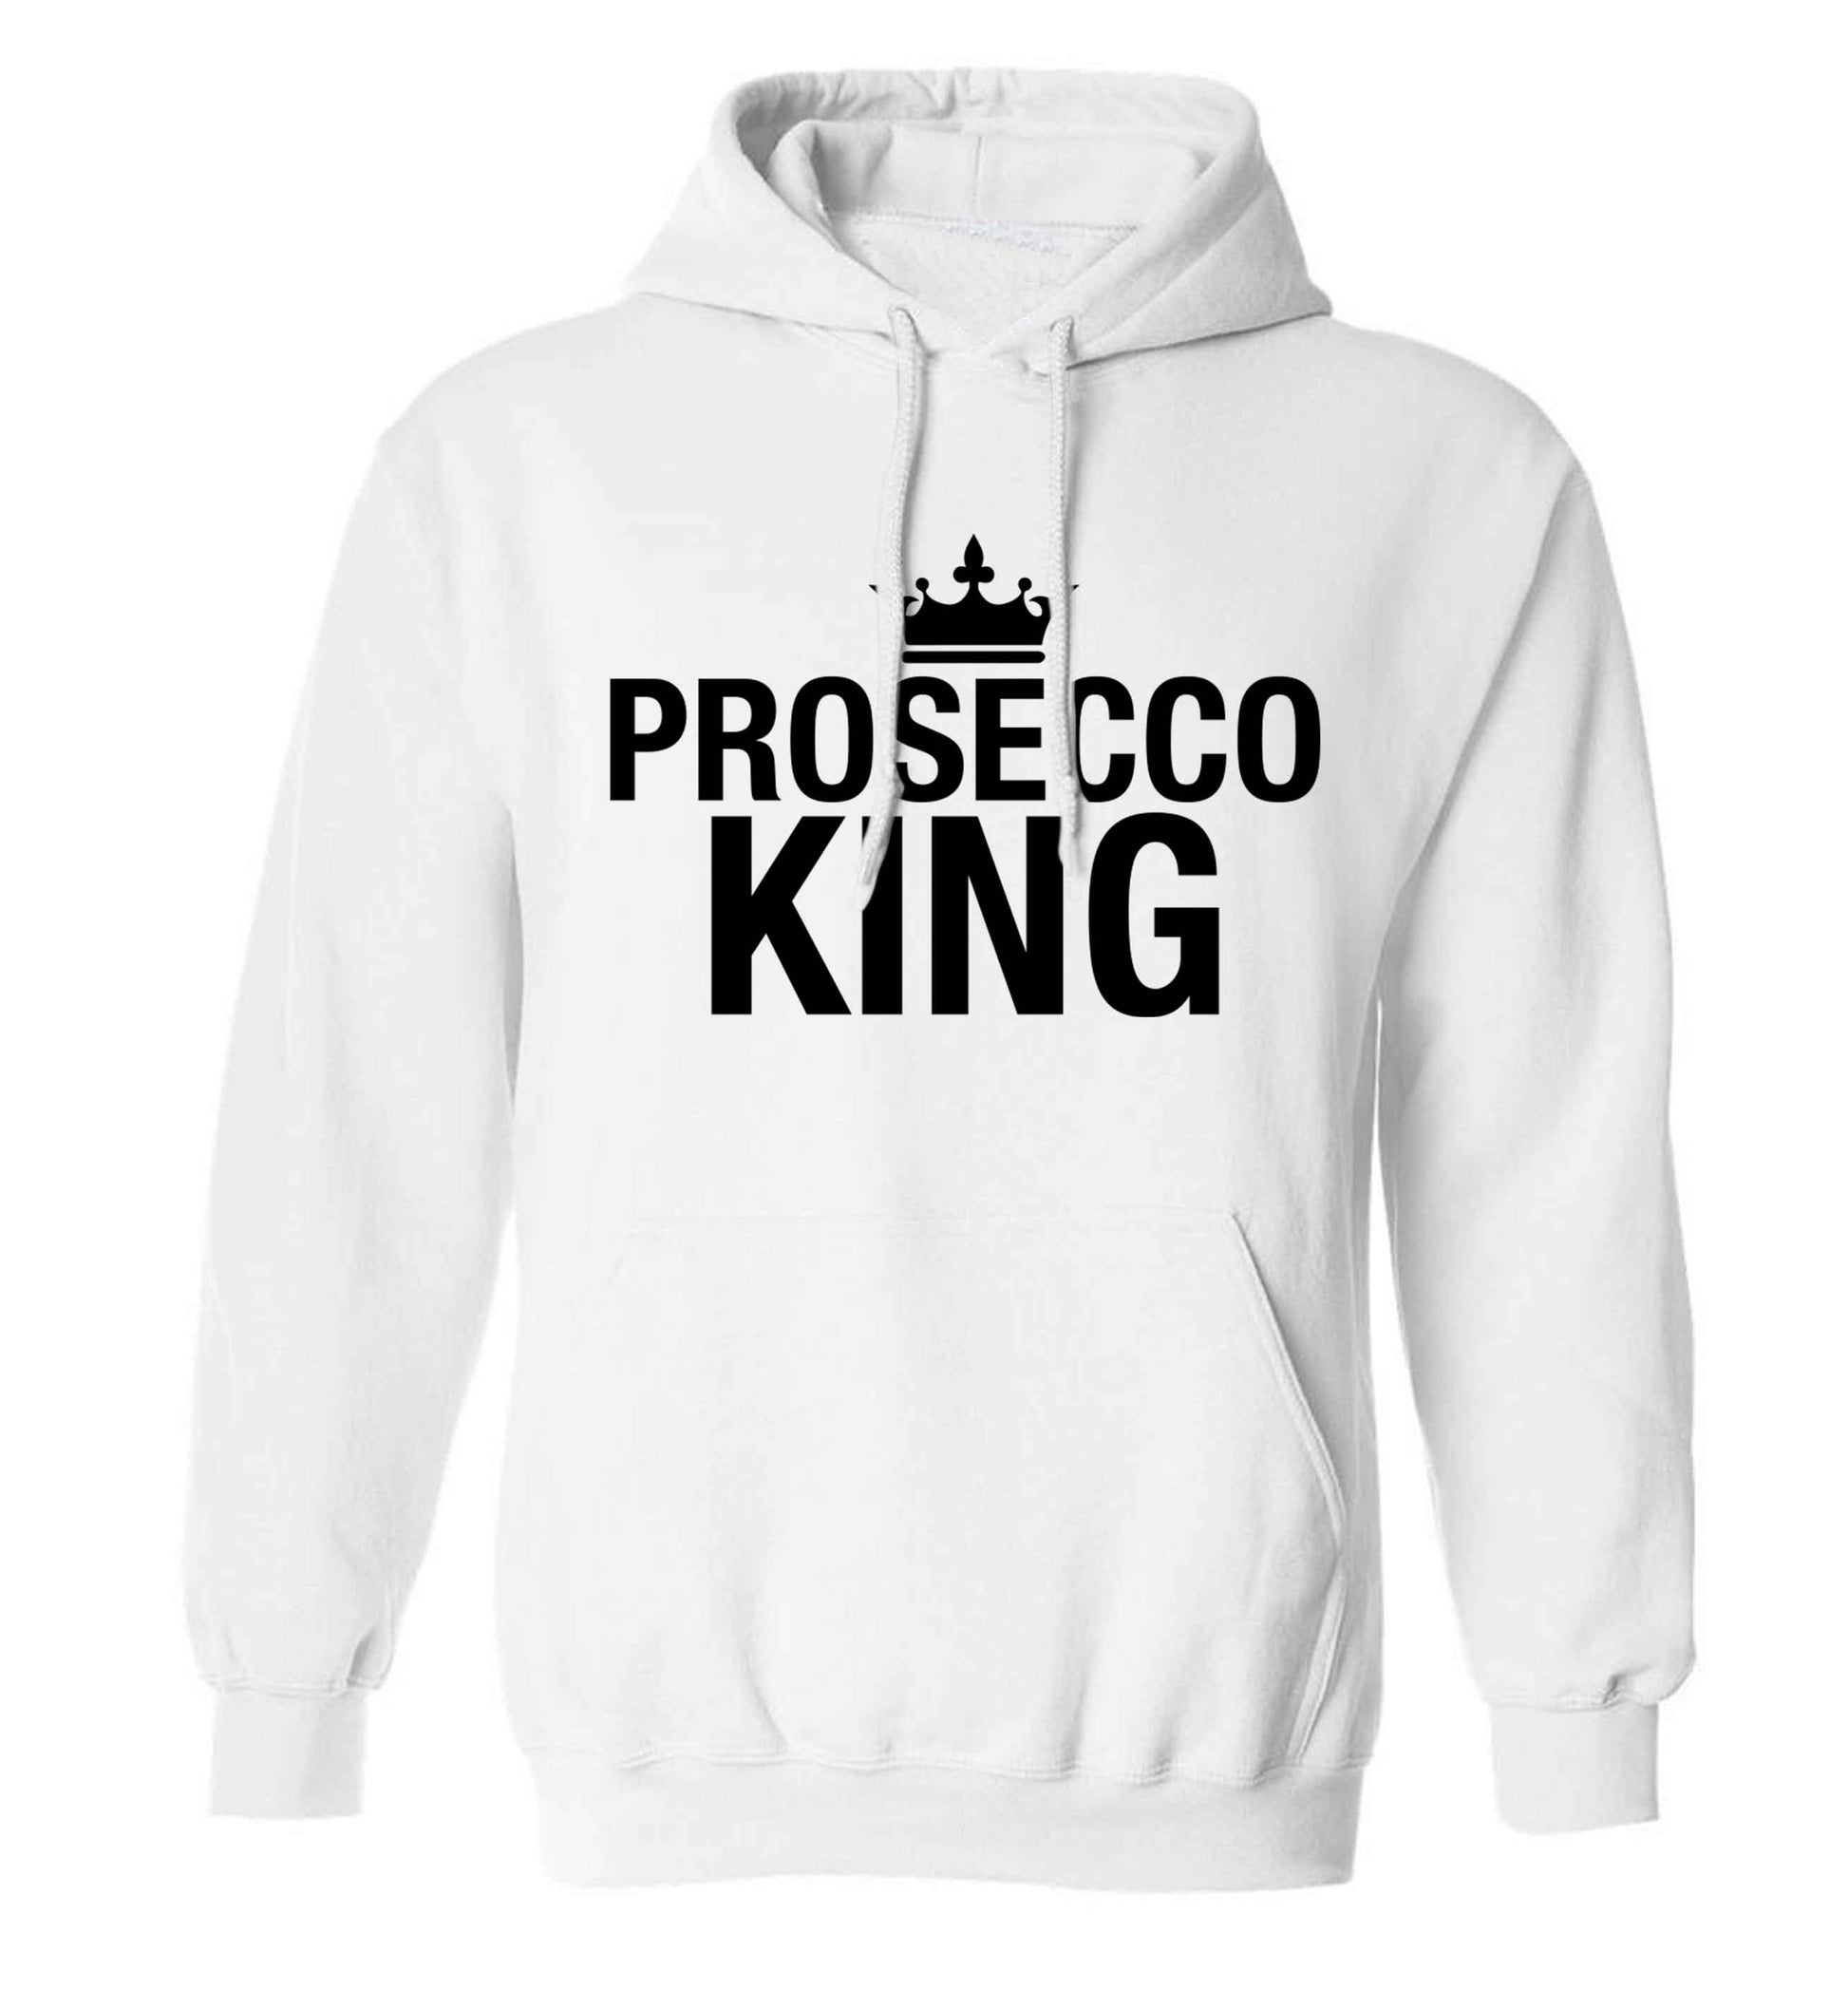 Prosecco king adults unisex white hoodie 2XL